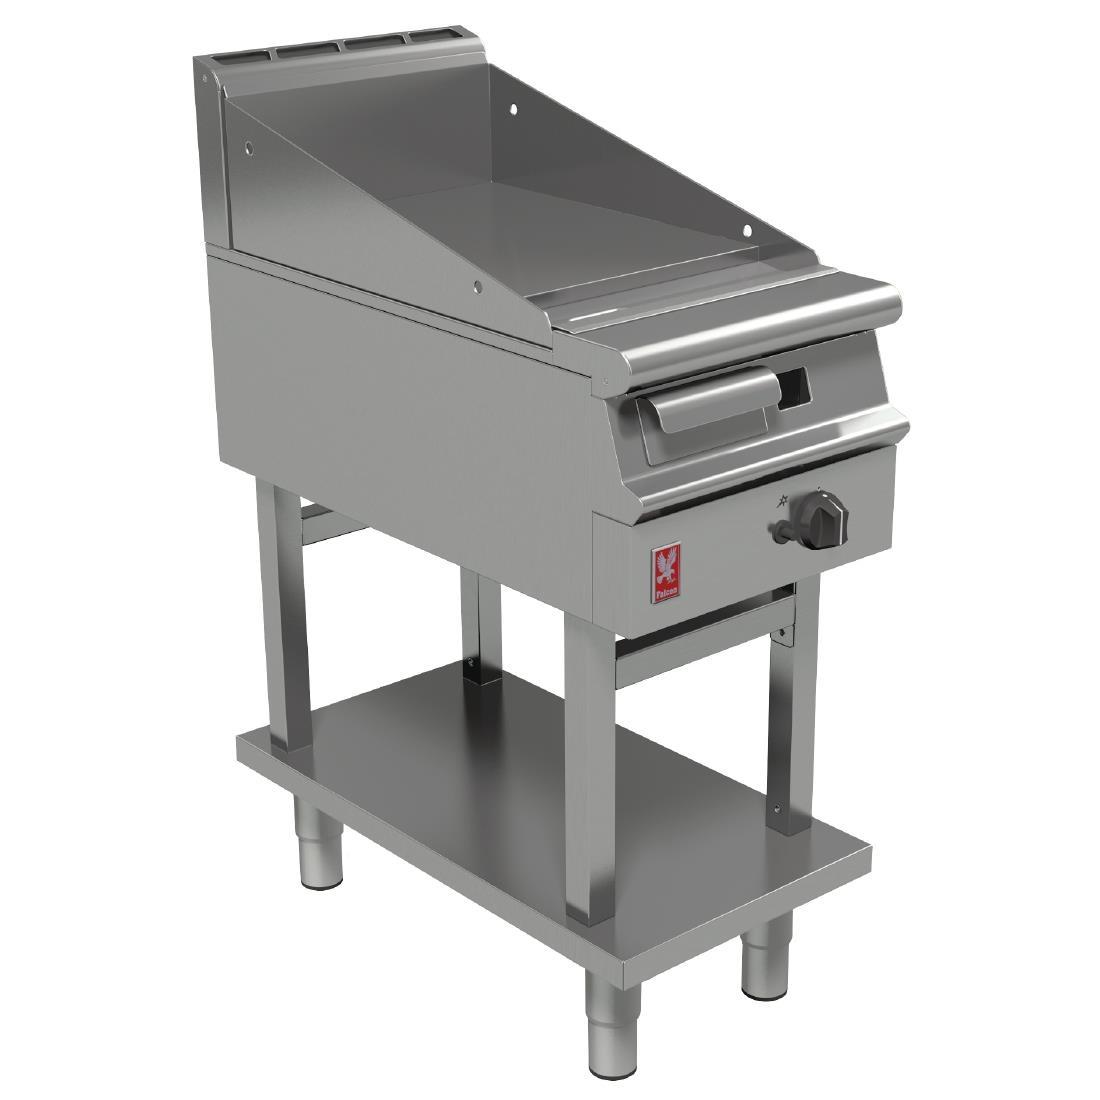 Falcon Dominator Plus 400mm Wide Smooth LPG Griddle on Fixed Stand G3441 - GP036-P  - 1